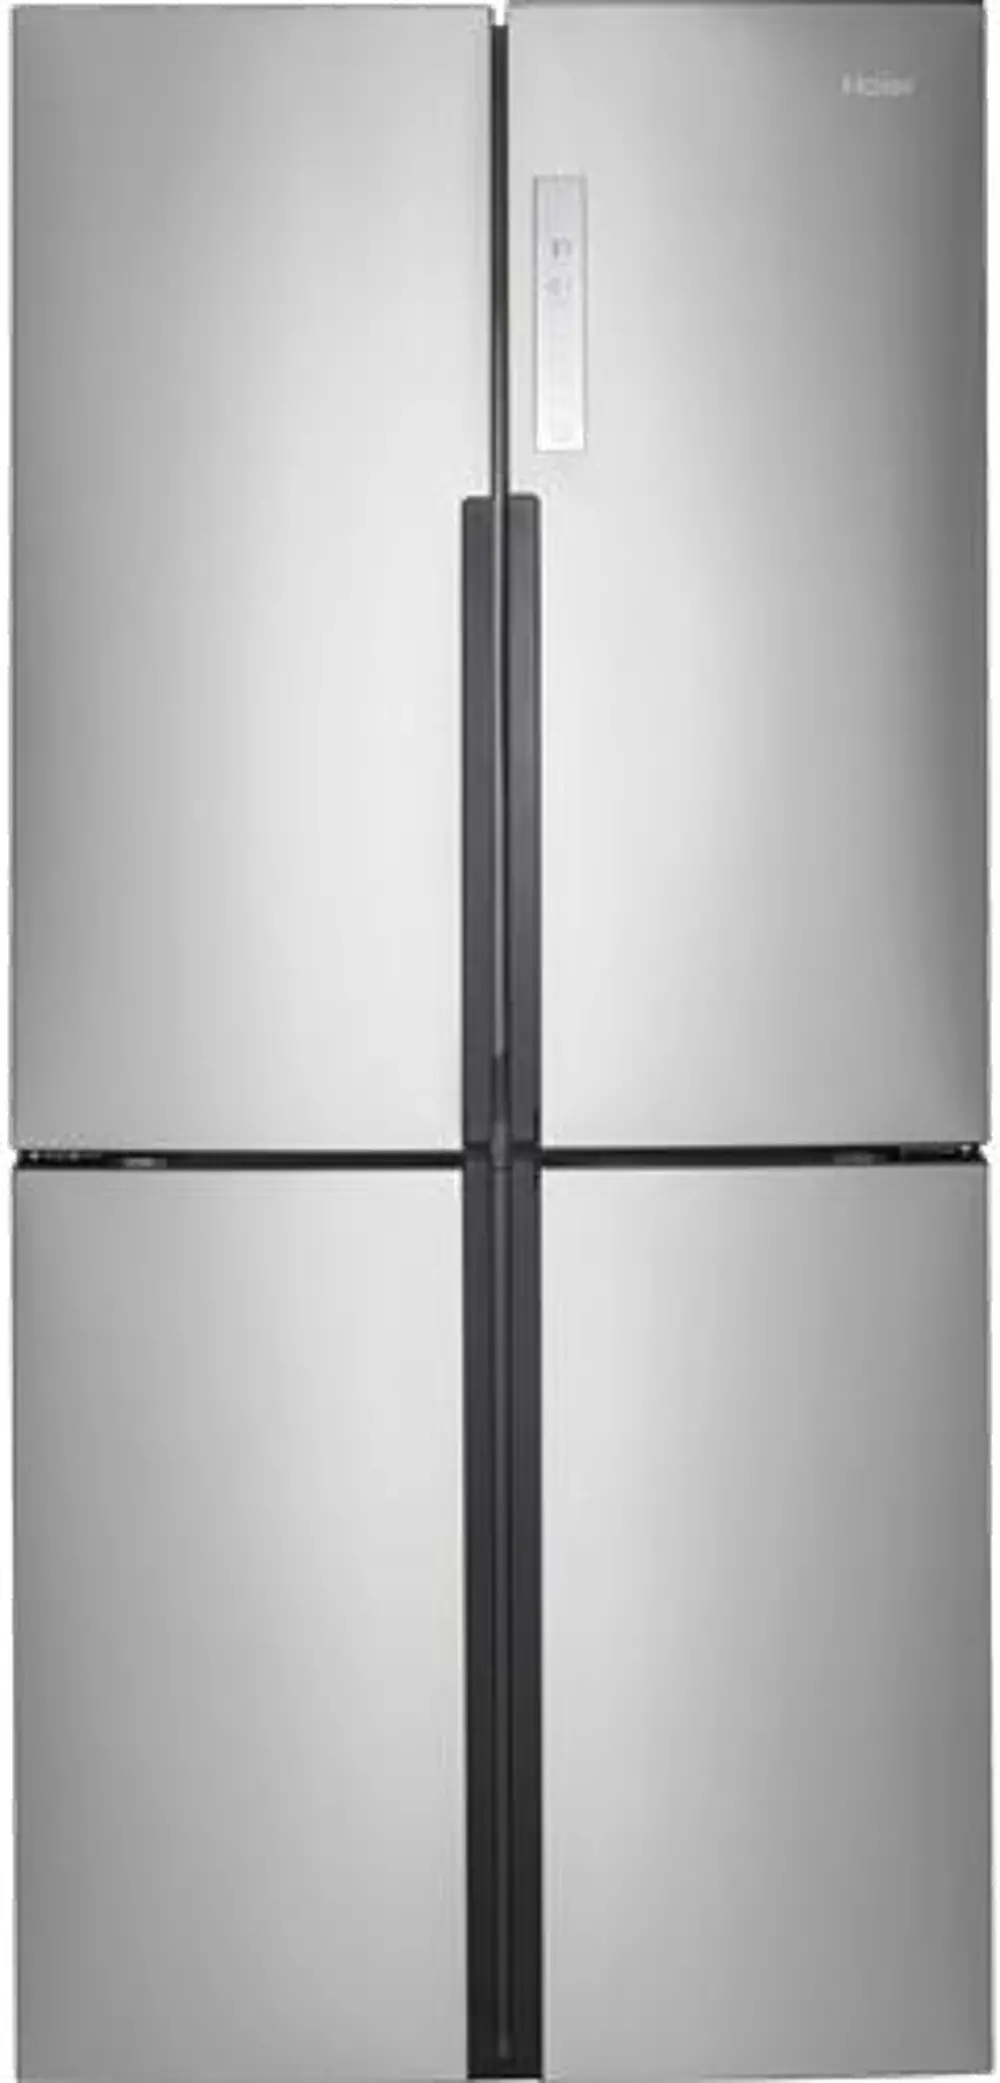 HRQ16N3BGS Haier 16.4 cu ft French Door Refrigerator - 33 W Counter Depth Stainless Steel-1